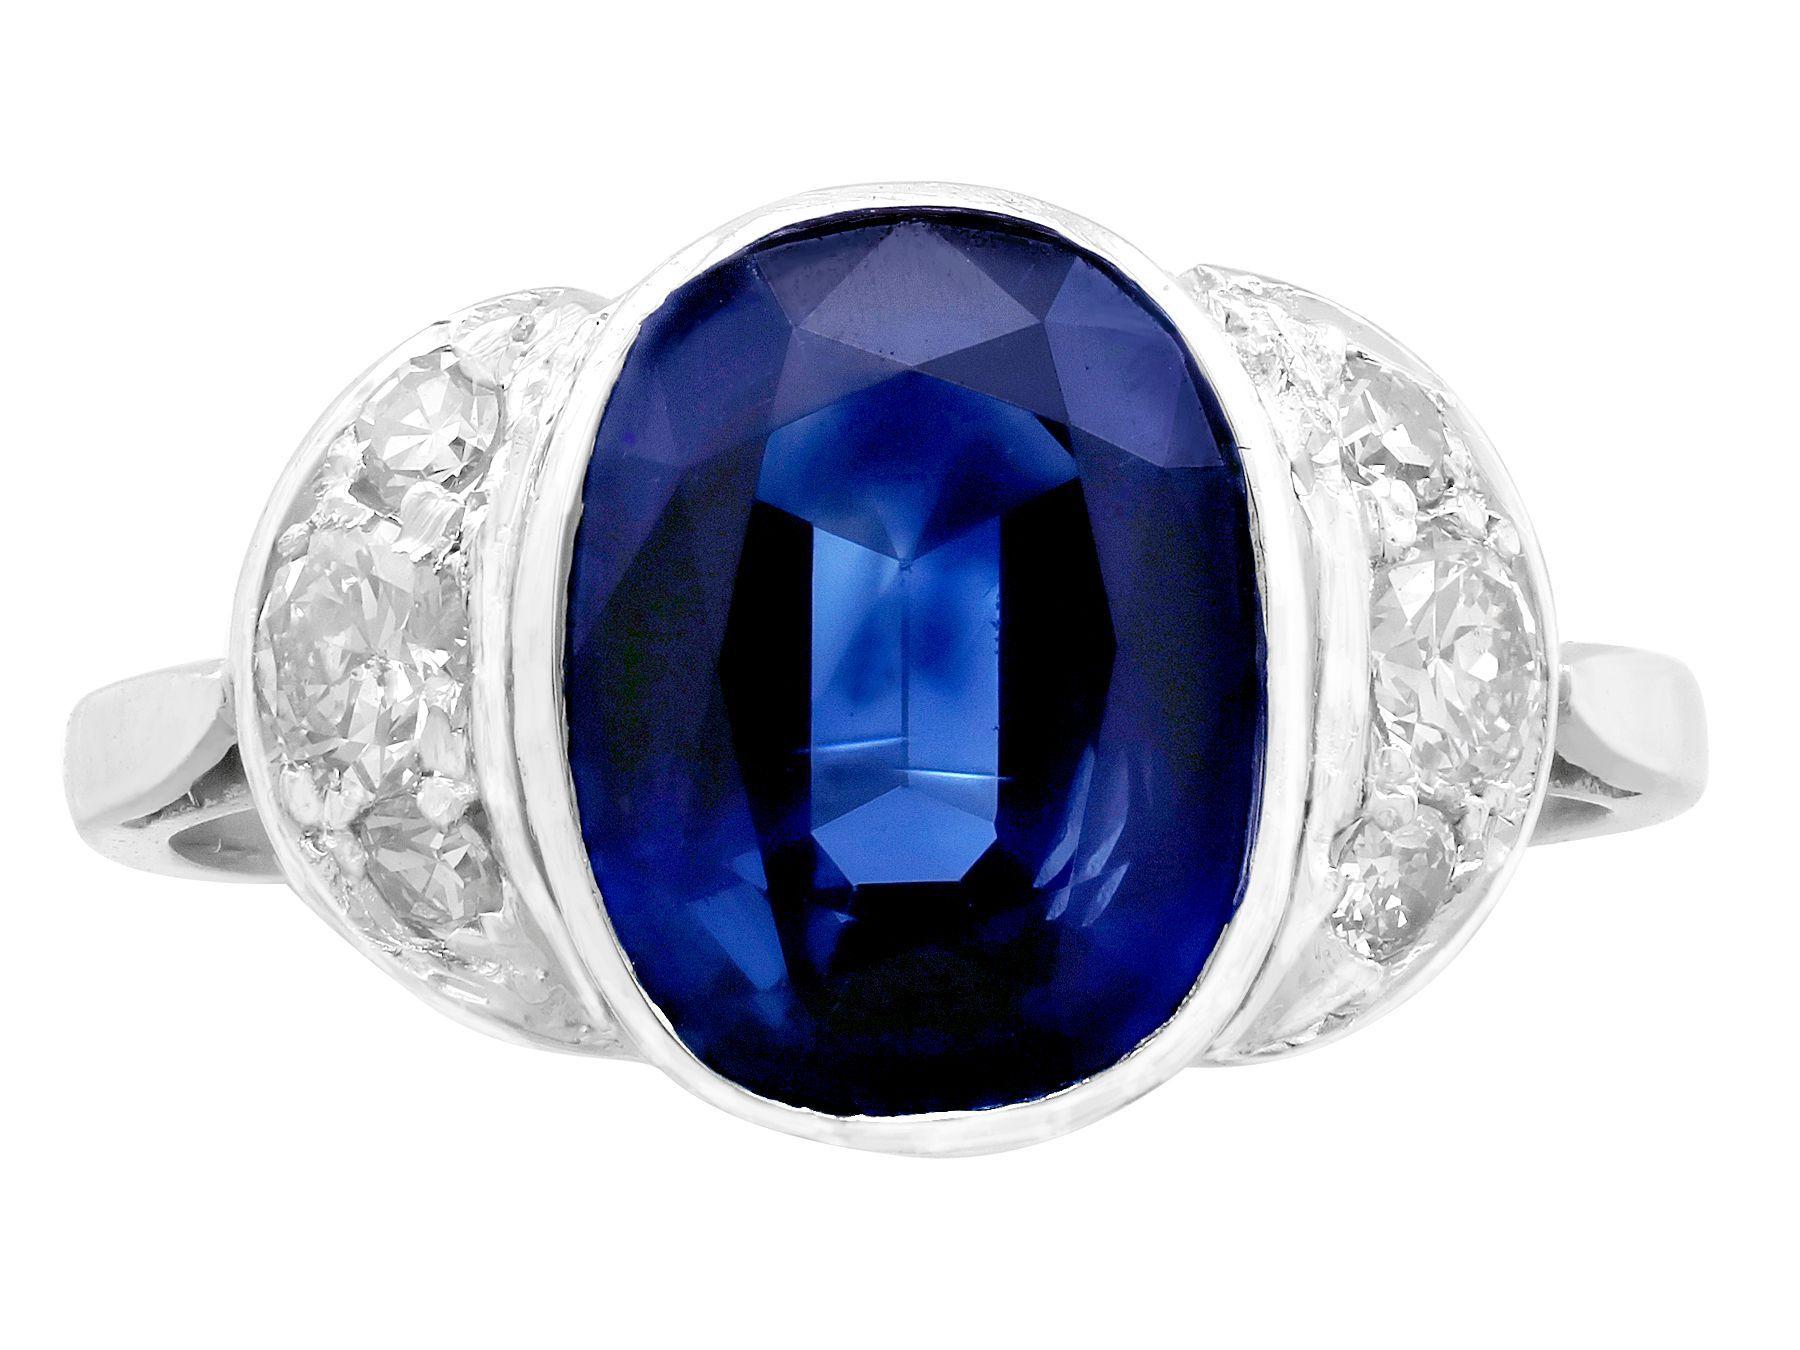 Certified 3.75 Carat Sapphire and Diamond White Gold Cocktail Ring, Circa 1930 In Excellent Condition For Sale In Jesmond, Newcastle Upon Tyne